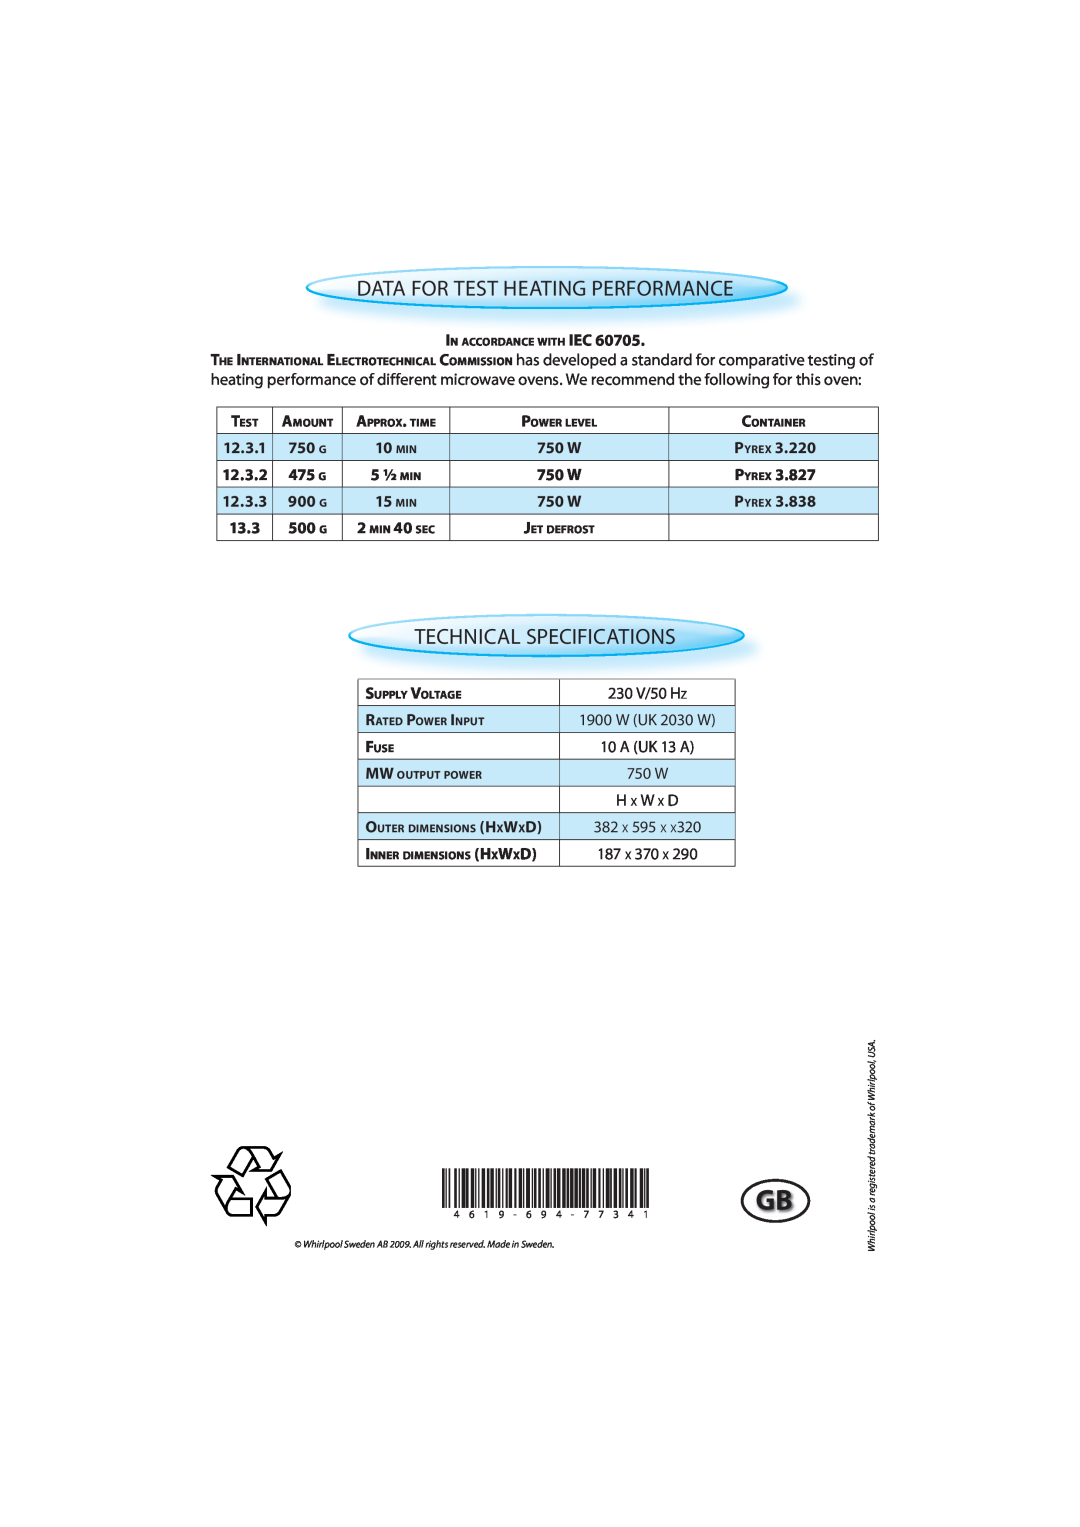 Whirlpool AMW 498, AMWR 483 manual Data For Test Heating Performance, Technical Specifications, 12.3.2, 12.3.3, 230 V/50 H Z 